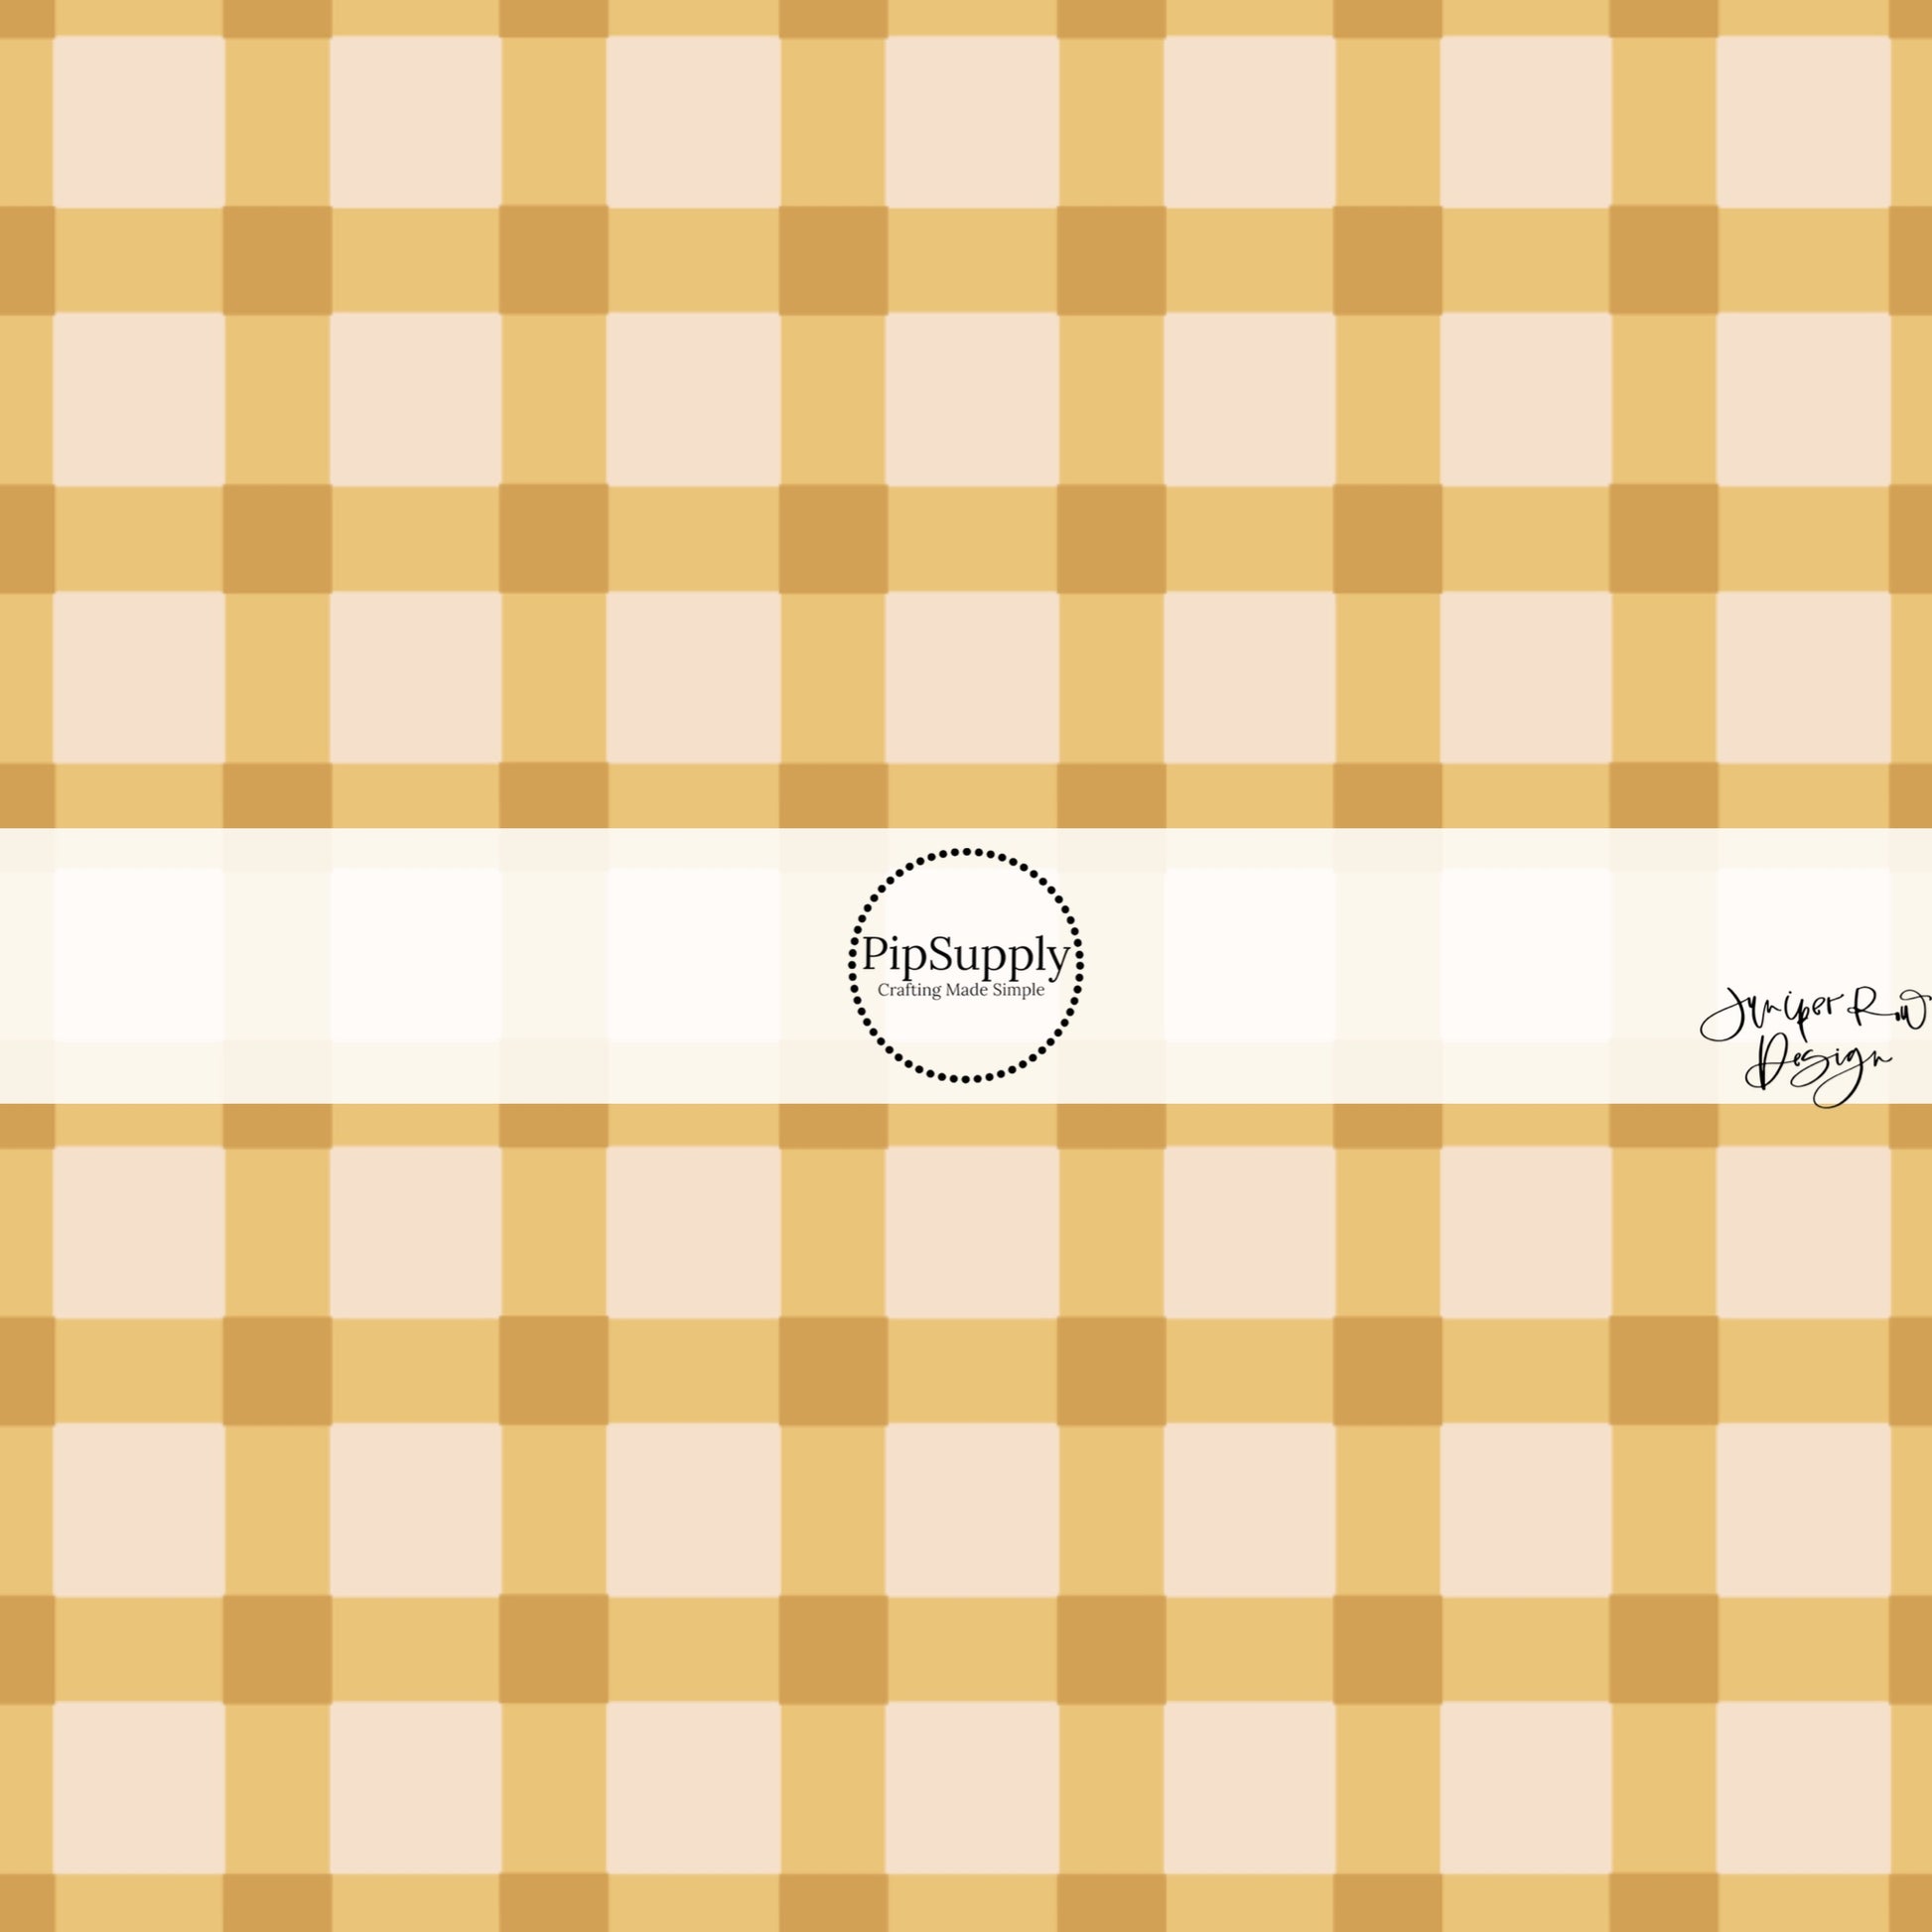 This summer fabric by the yard features summer haze yellow and cream plaid pattern. This fun summer themed fabric can be used for all your sewing and crafting needs!